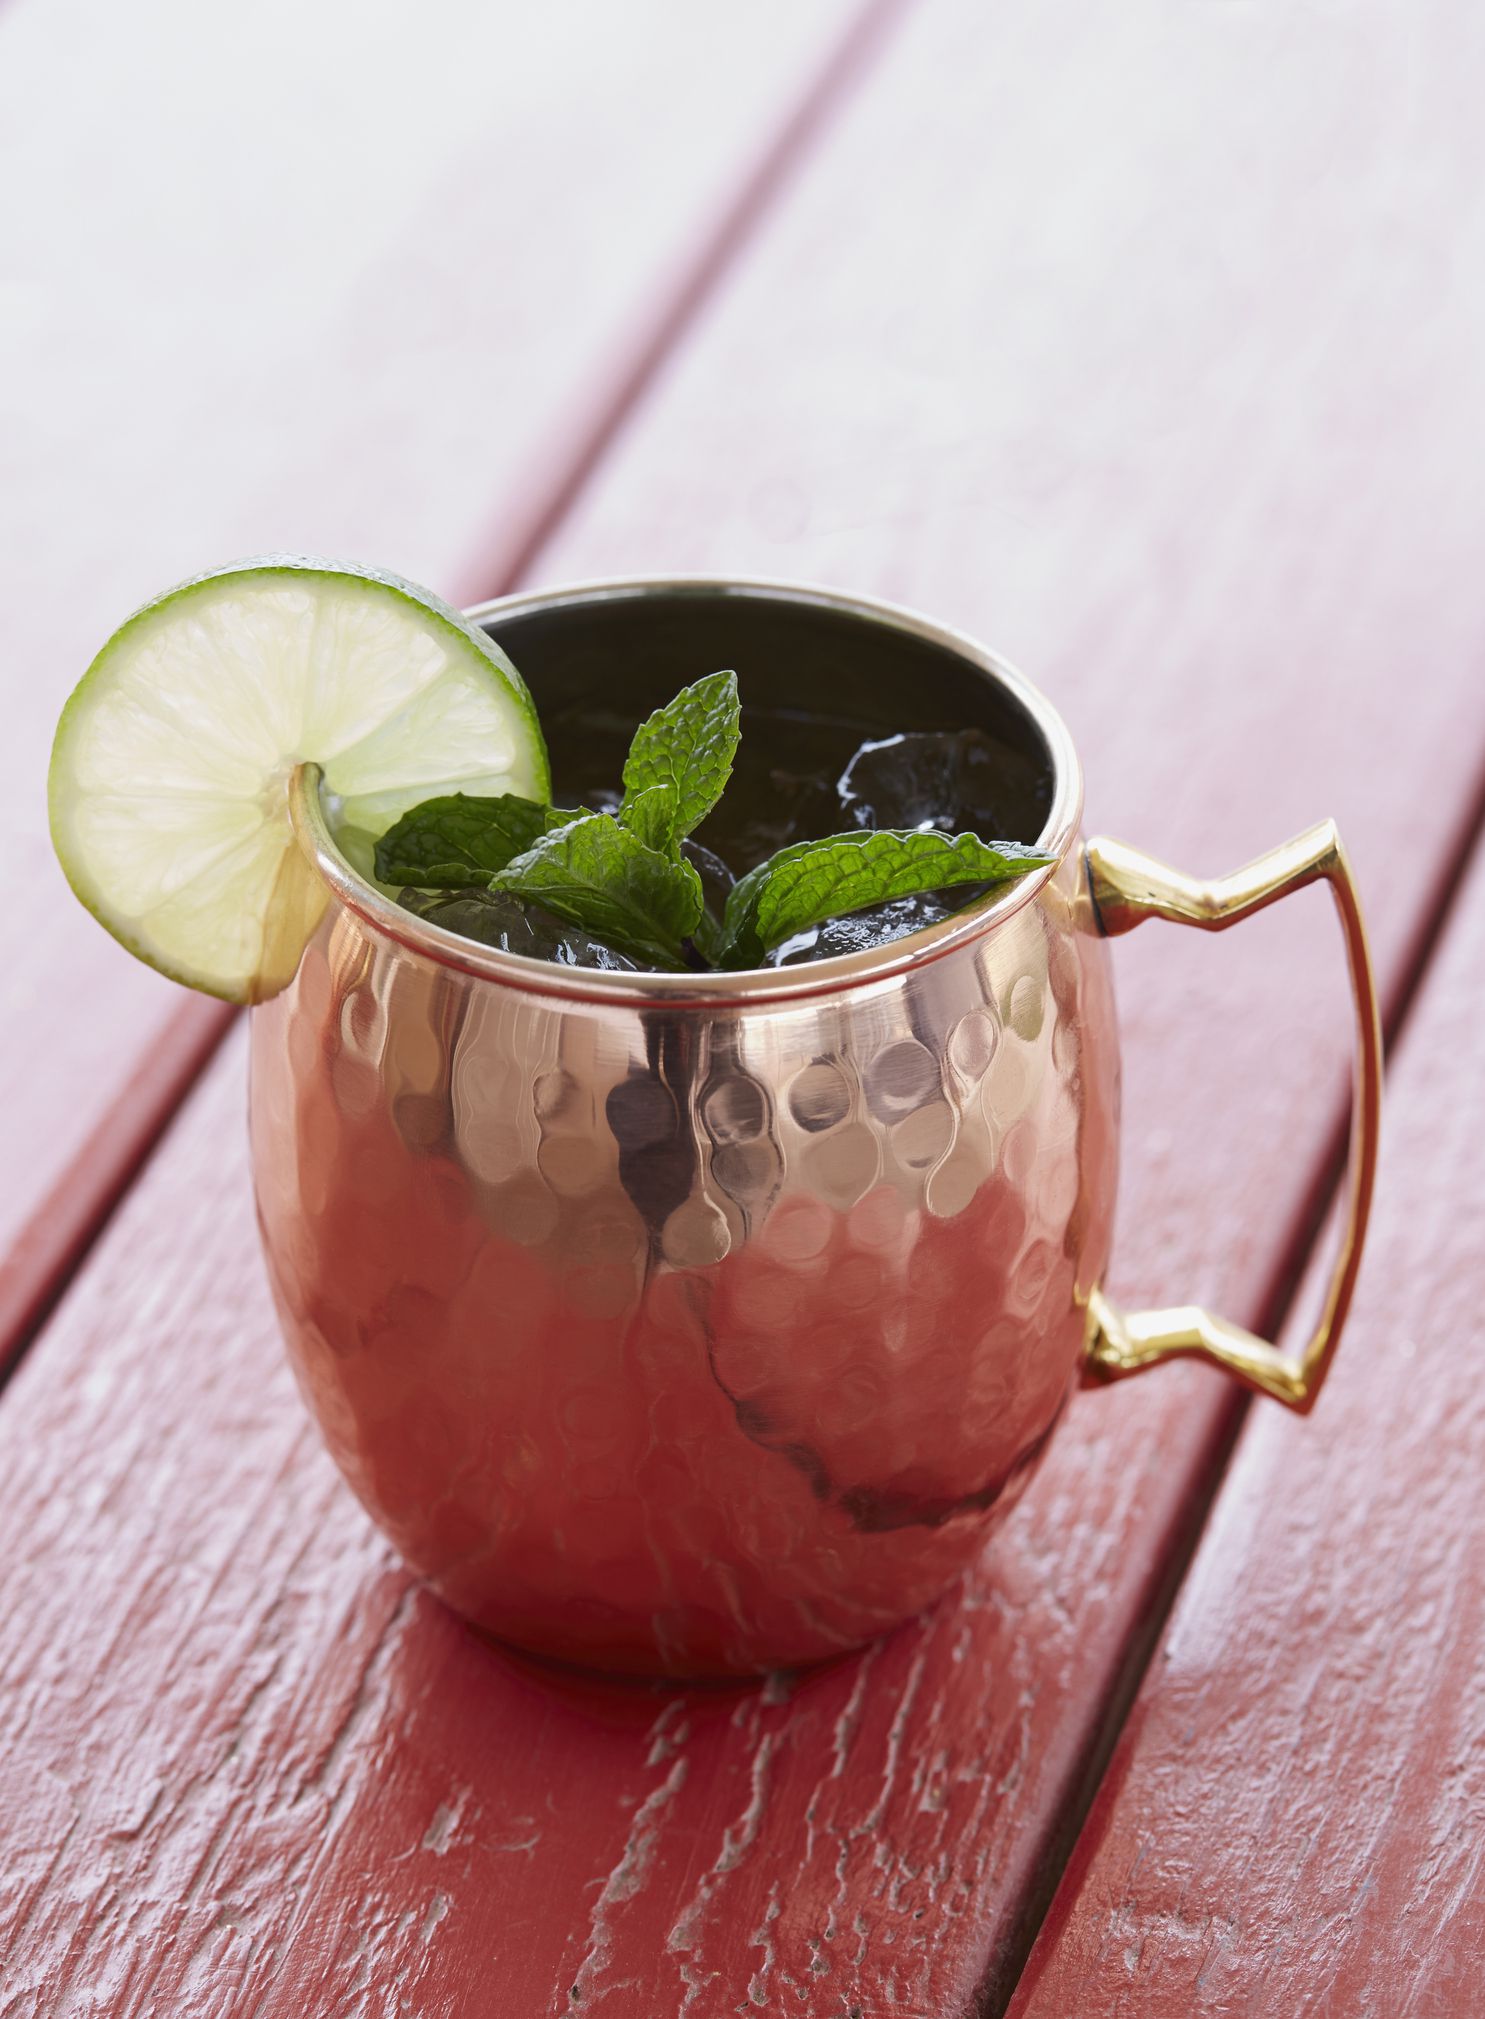 Moscow Mule Recipe Measurements